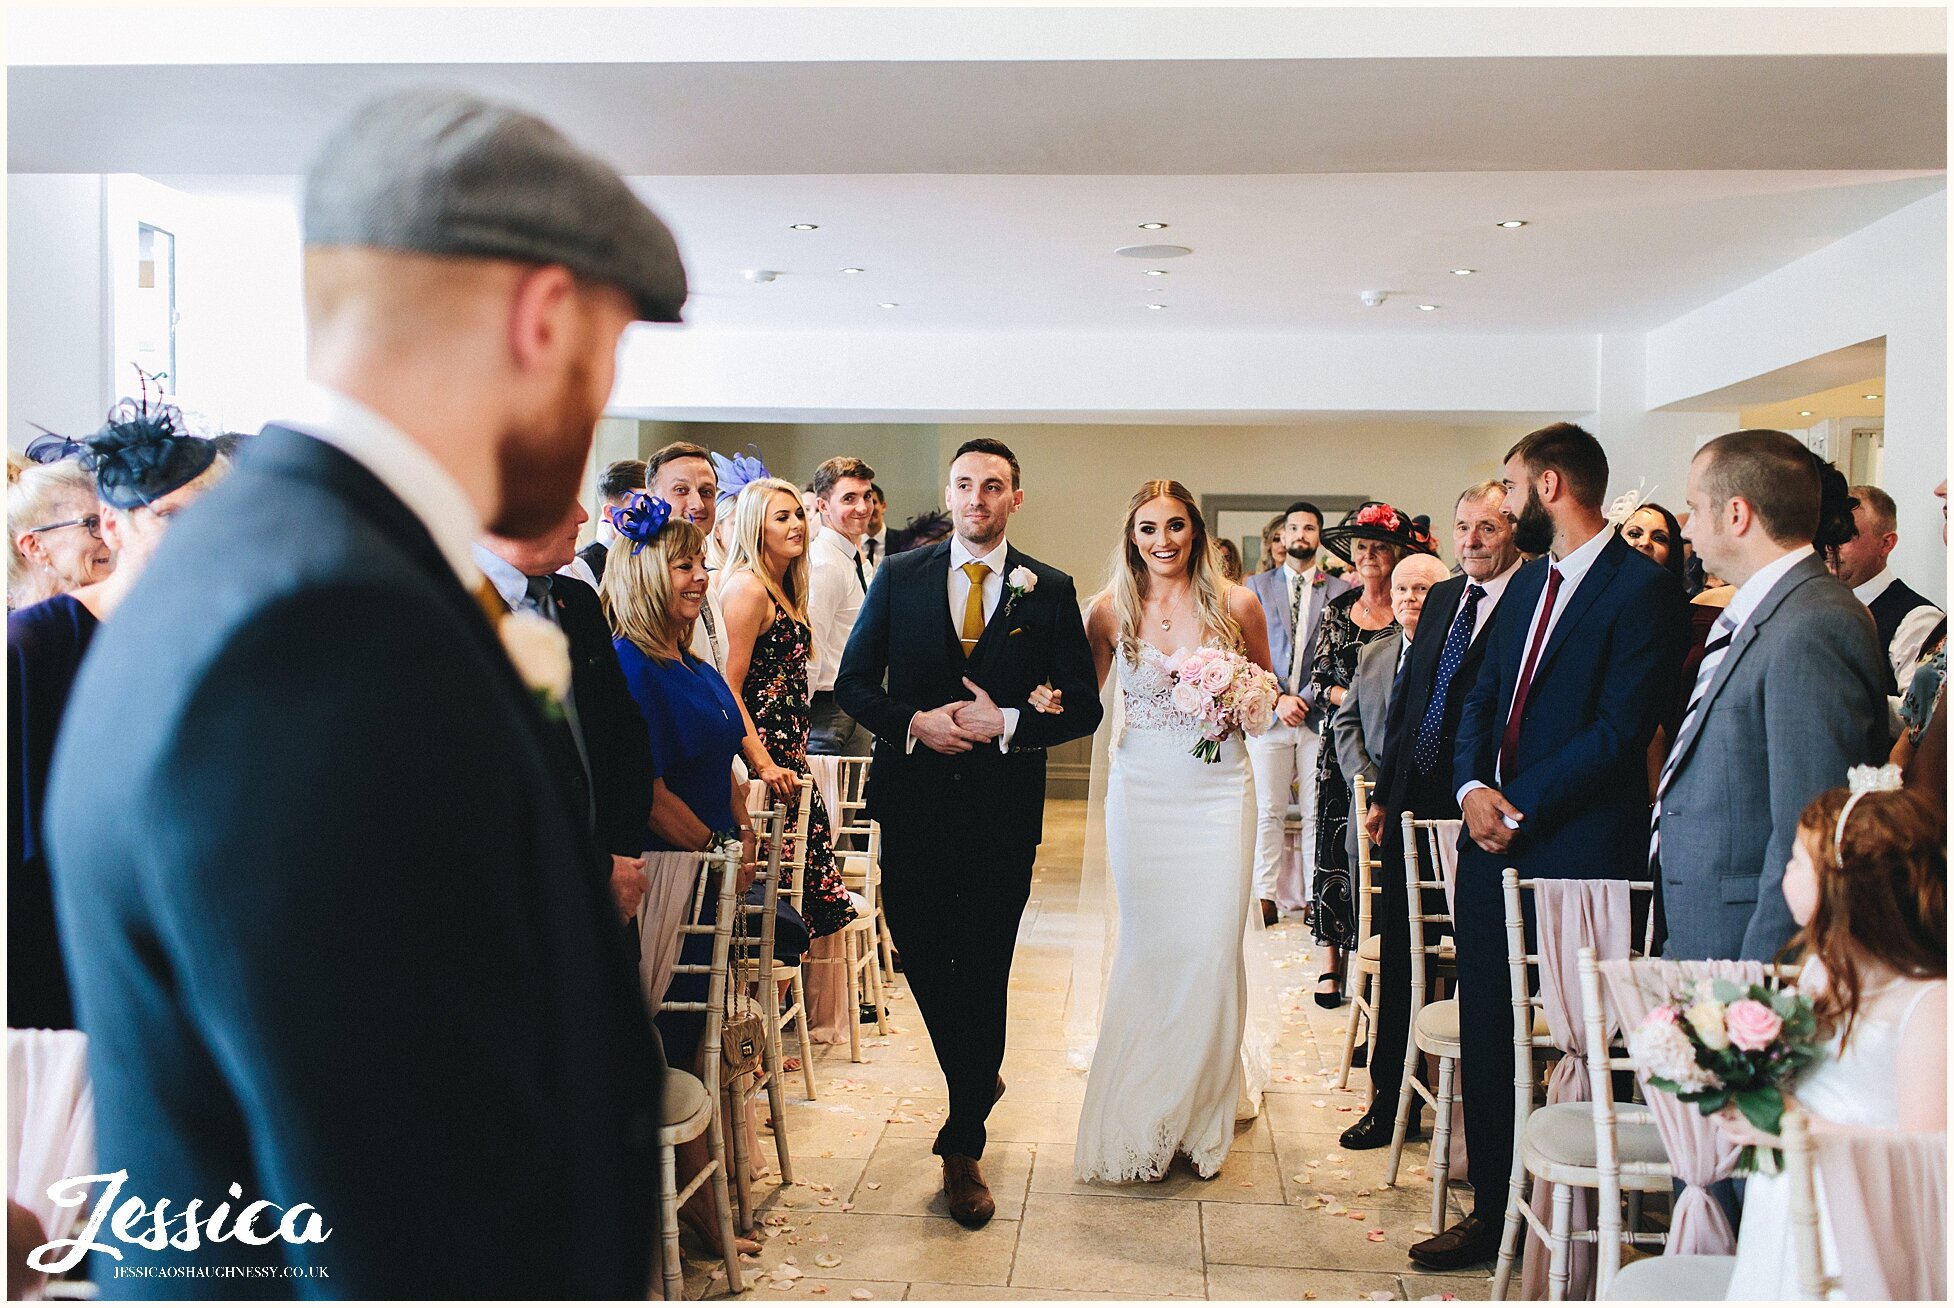 the bride walks down the aisle with her brother, seeing the groom for the first time